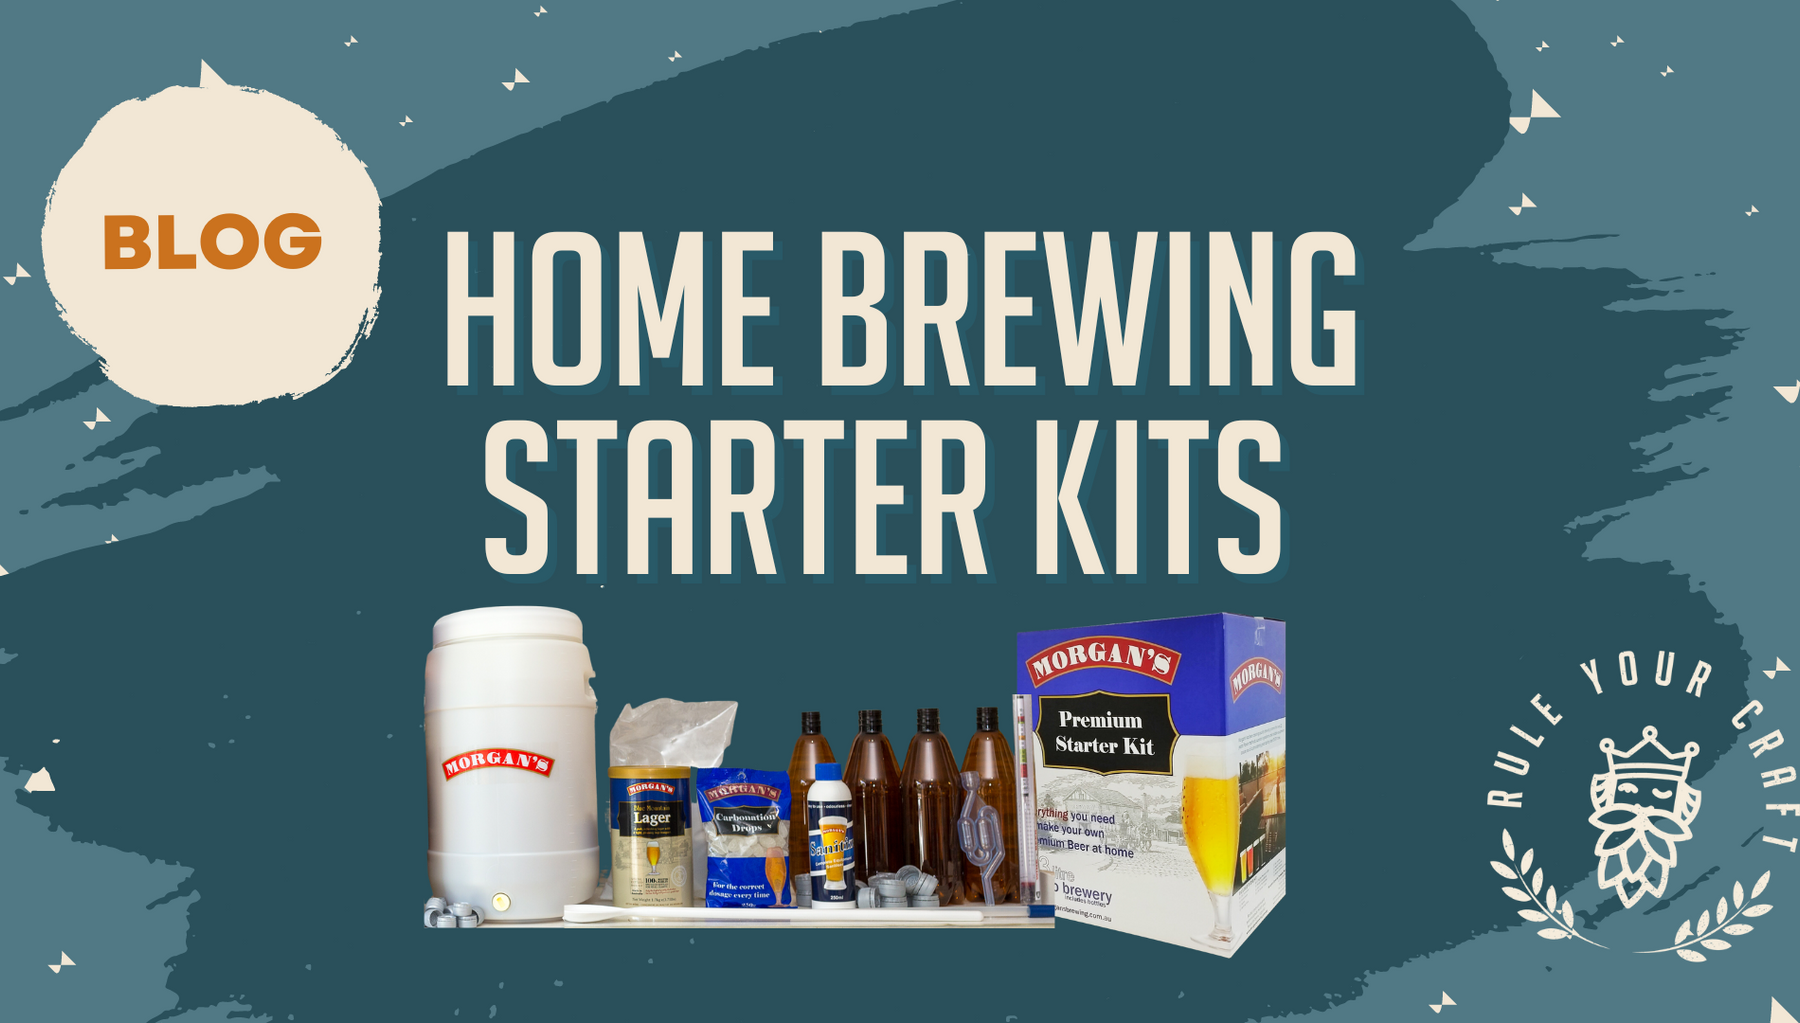 Home brewing starter kits - which one is right for me?